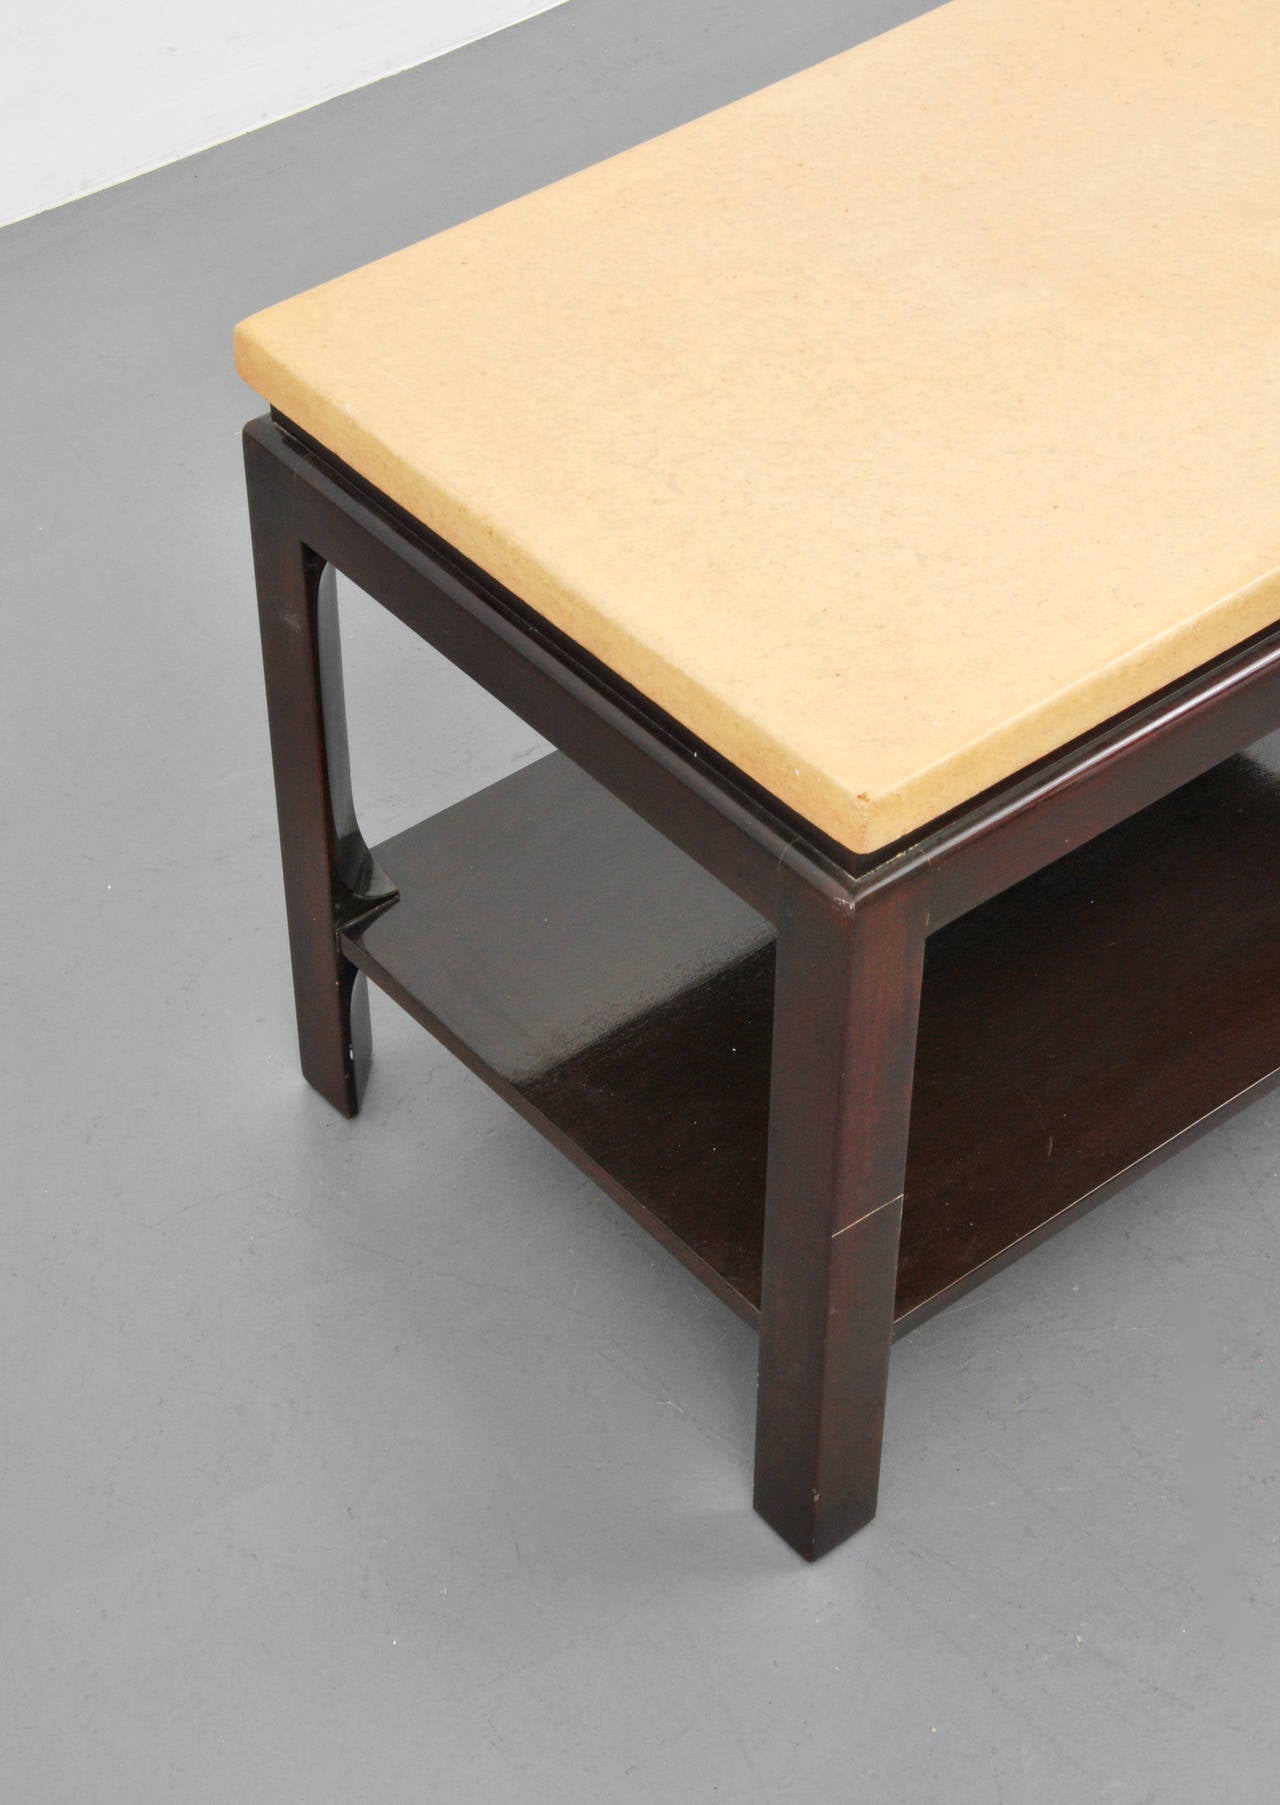 Side tables are two-tier with cork tops. 

Markings: Marked.